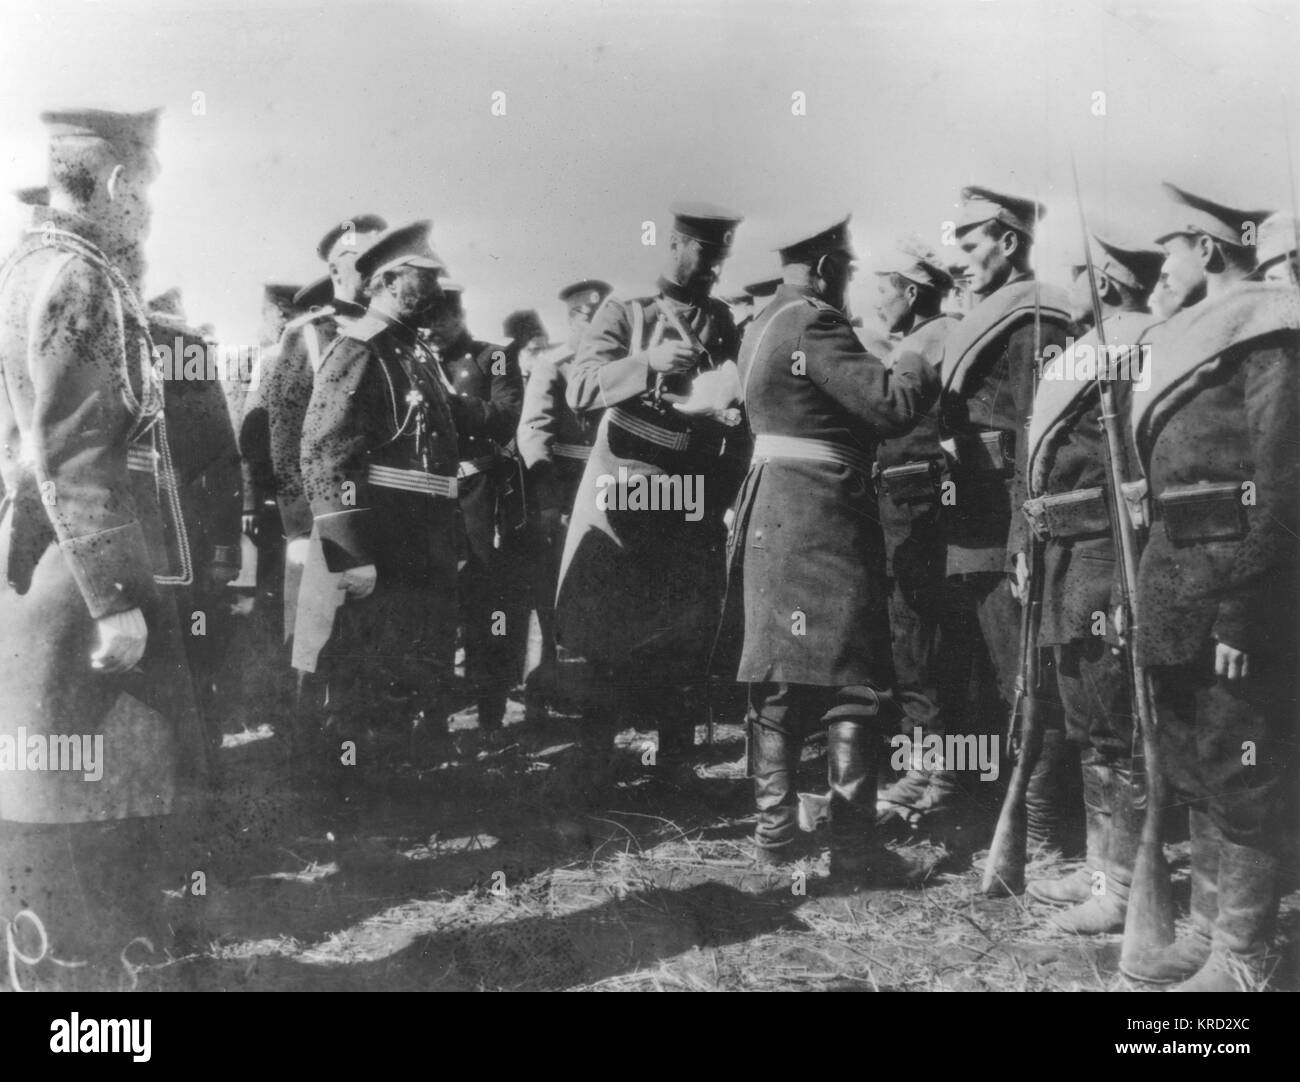 Several Russian soldiers resieve medals for their valiant efforts during the (1904 to 1905) Russo-Japanese War.     Date: circa 1905 Stock Photo